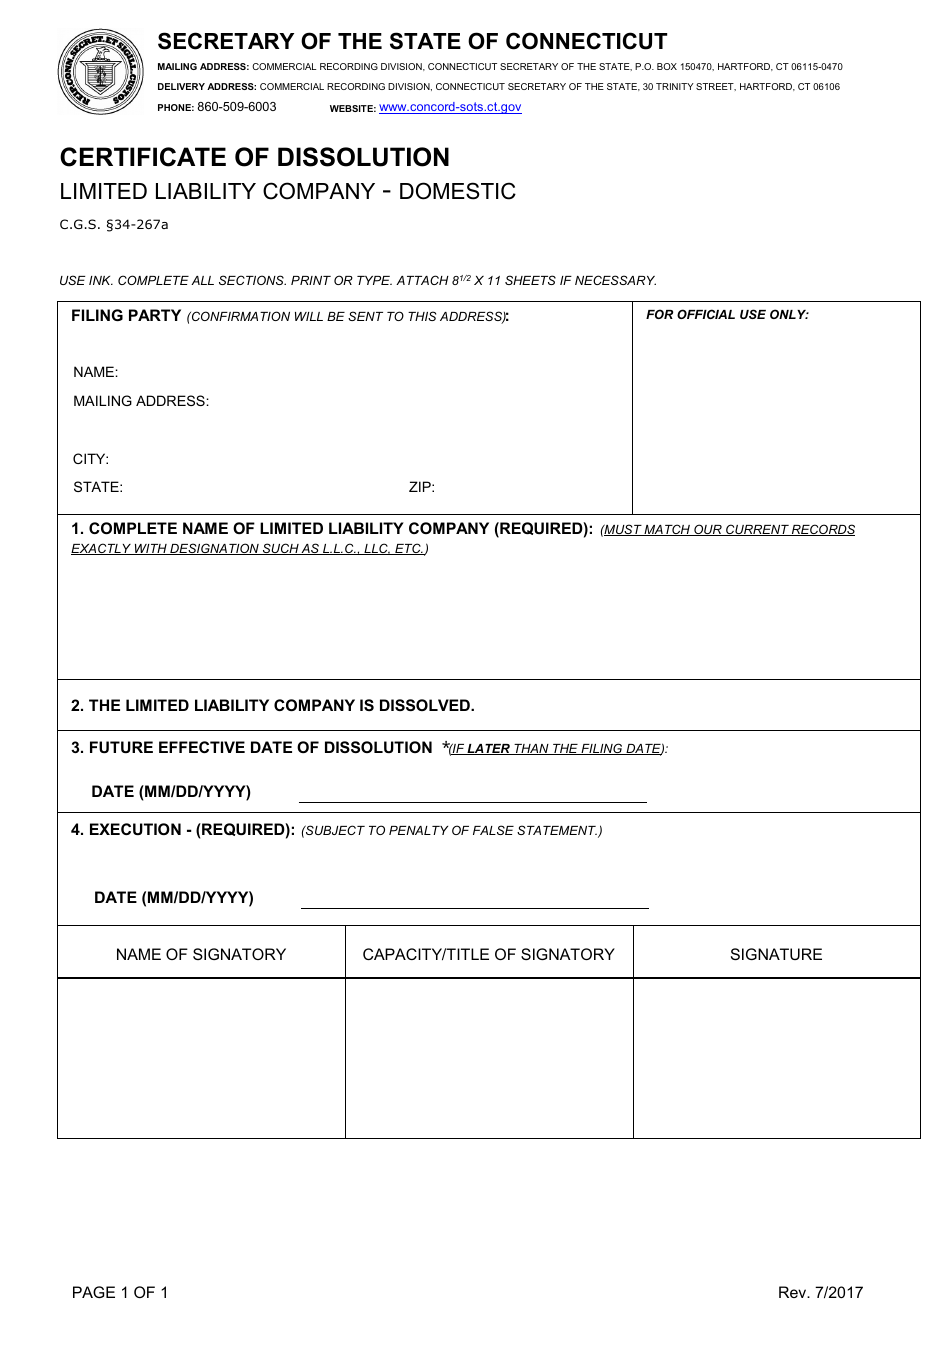 Certificate of Dissolution - Limited Liability Company - Domestic - Connecticut, Page 1